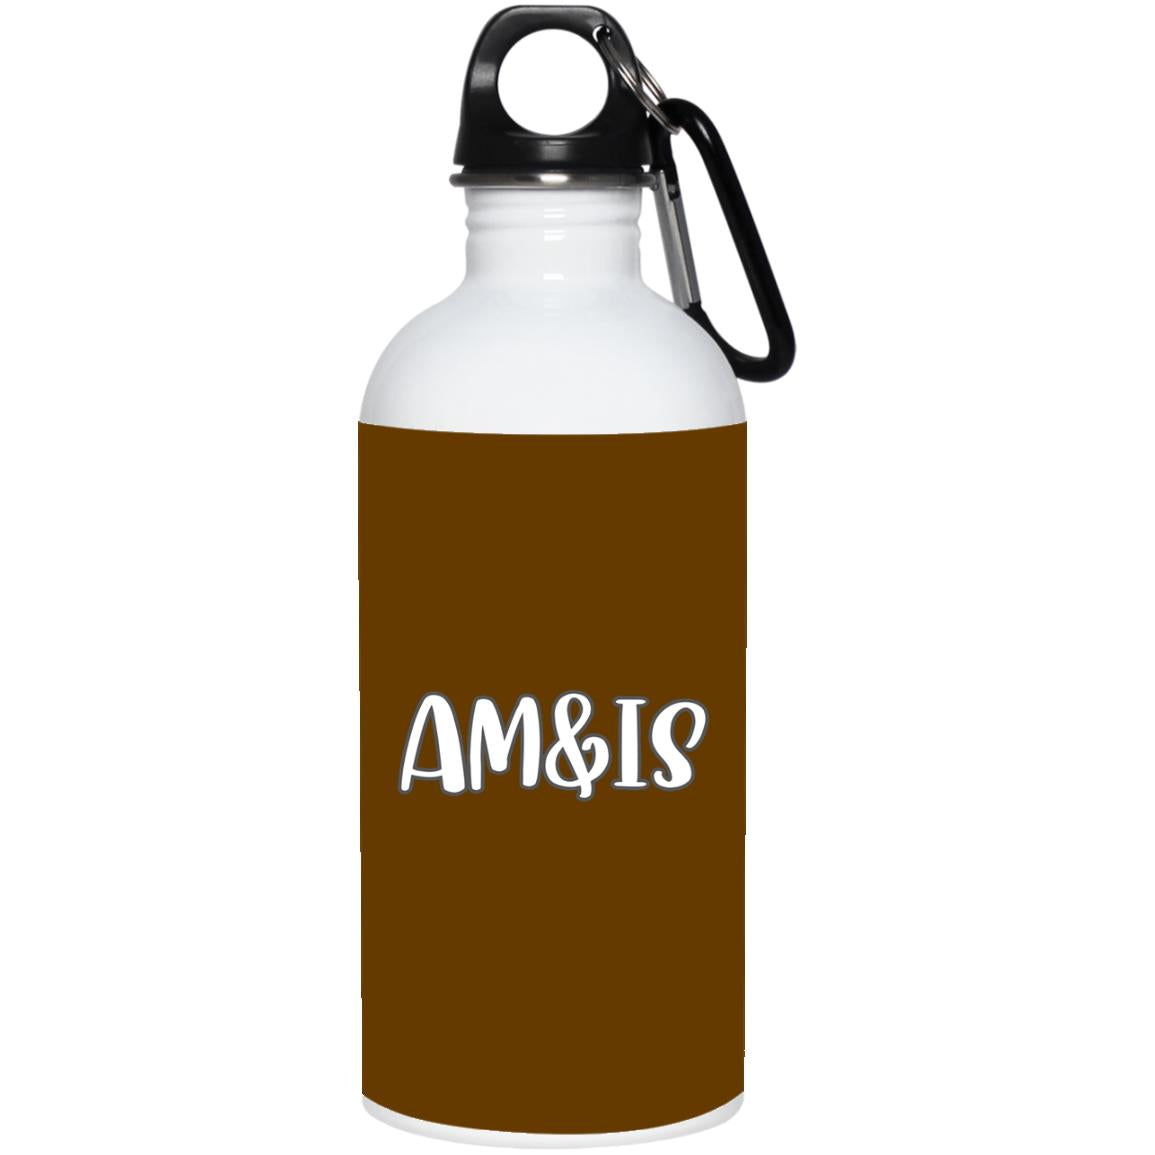 BROWN ONE SIZE - AM&IS Activewear 20 oz. Stainless Steel Water Bottle - Drinkware at TFC&H Co.